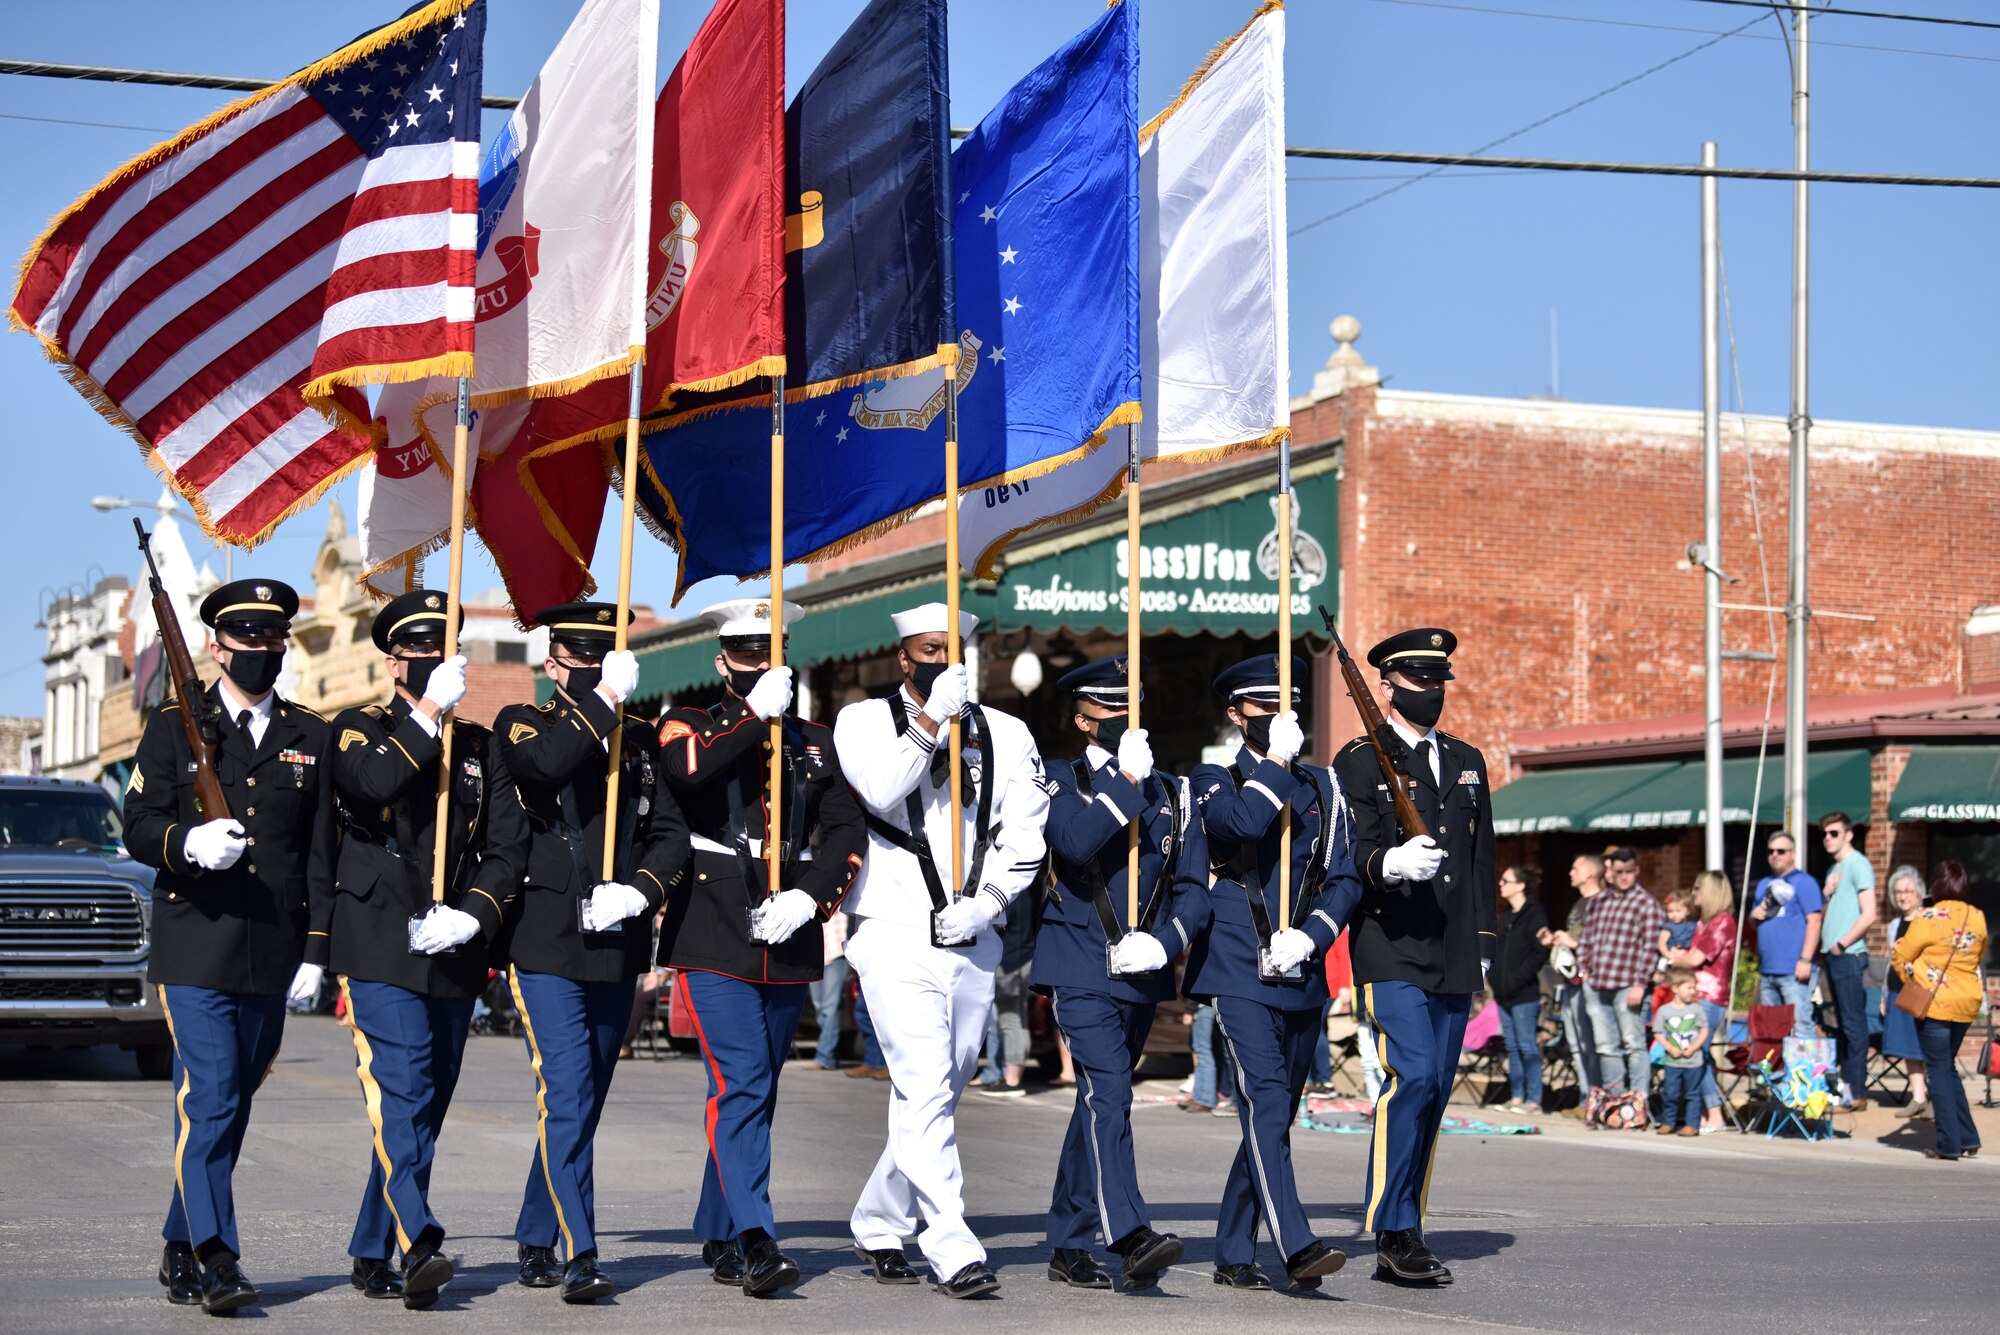 Goodfellow Joint Service Color Guard members lead the 89th Annual San Angelo Rodeo parade through downtown San Angelo, April 10, 2021. The parade marked the beginning of the 89th Annual San Angelo Stock Show and Rodeo. (U.S. Air Force photo by Staff Sgt. Seraiah Wolf)